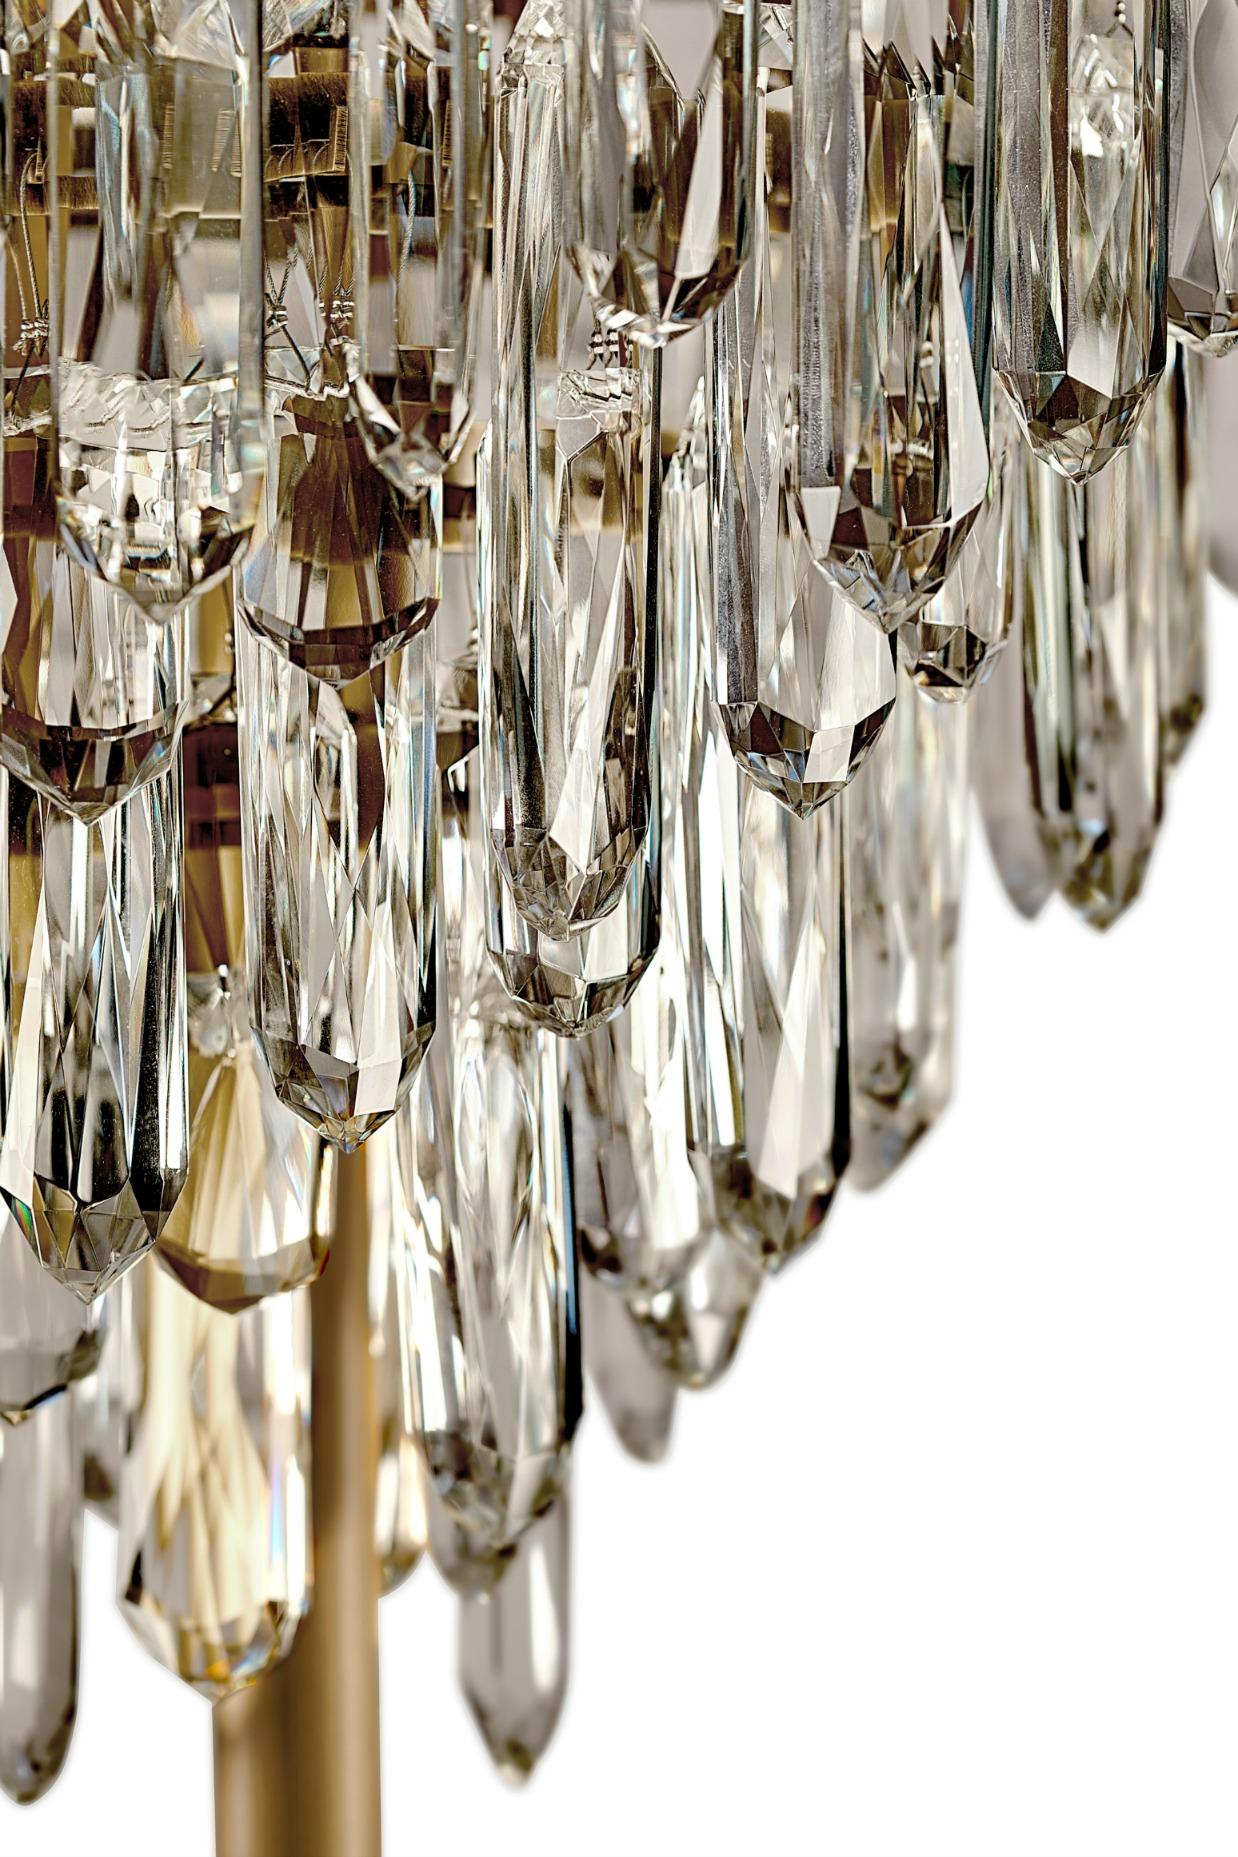 The allure of Mexico’s Giant Crystal Cave was the inspiration for NAICCA Floor Light, an accent lamp that represents the legend of crystal origins. The aged brushed brass structure and the Quartz crystal diffuser merge together to brighten any home